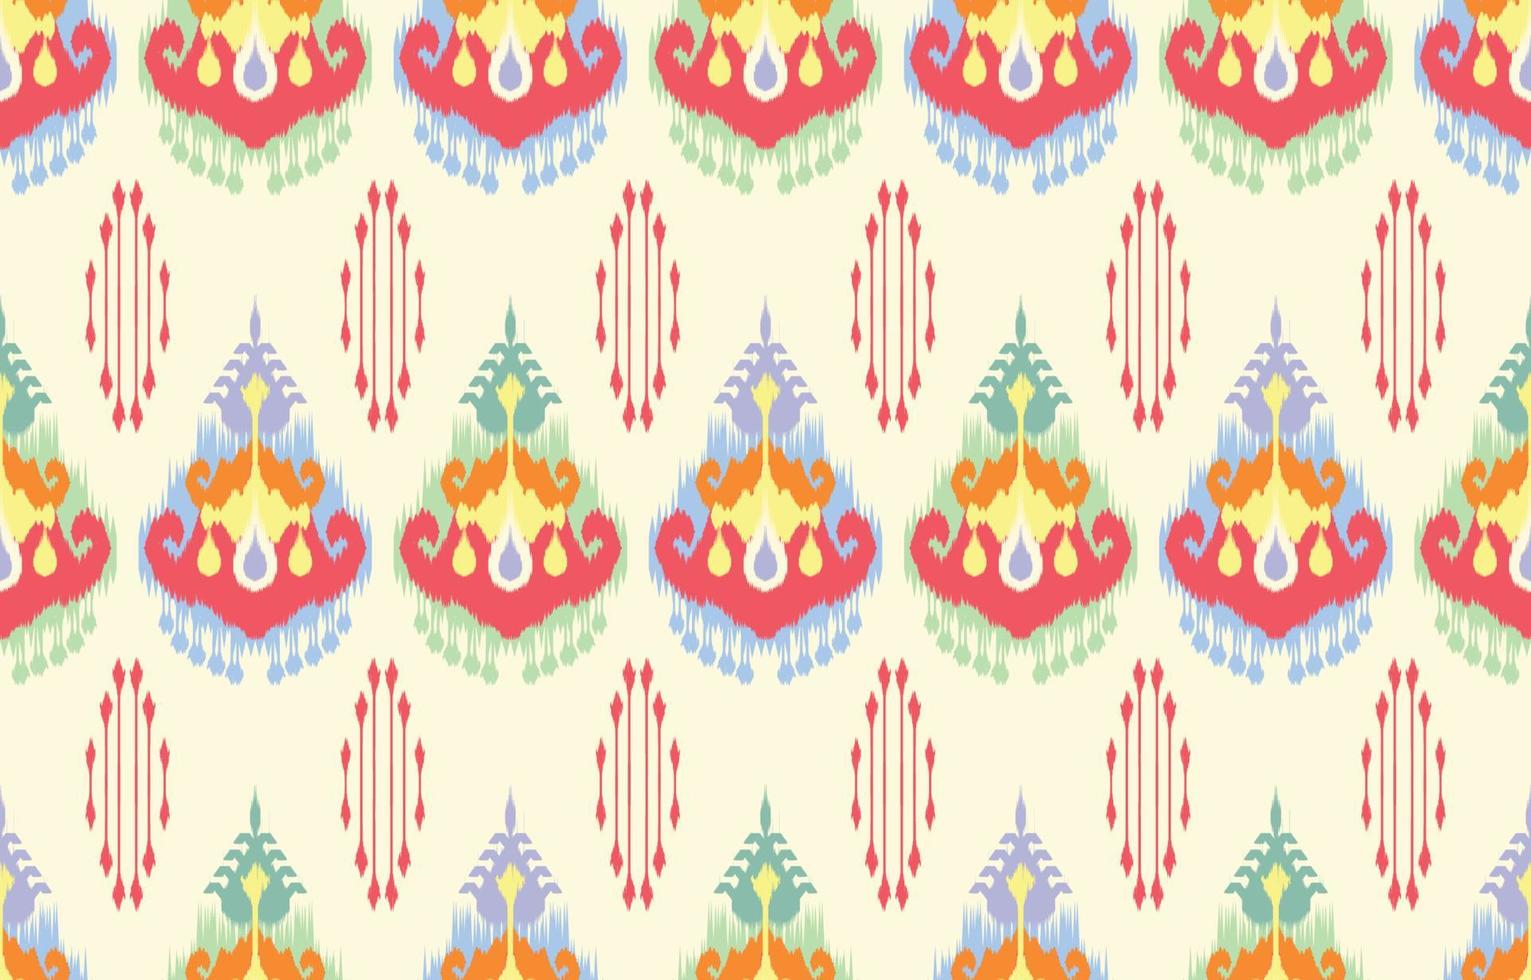 Uzbek ikat pattern, Beautiful ethnic art. Seamless pattern in tribal, folk embroidery in central Asia style. Aztec geometric art ornament print.Design for carpet, wallpaper, clothing, wrapping, fabric vector